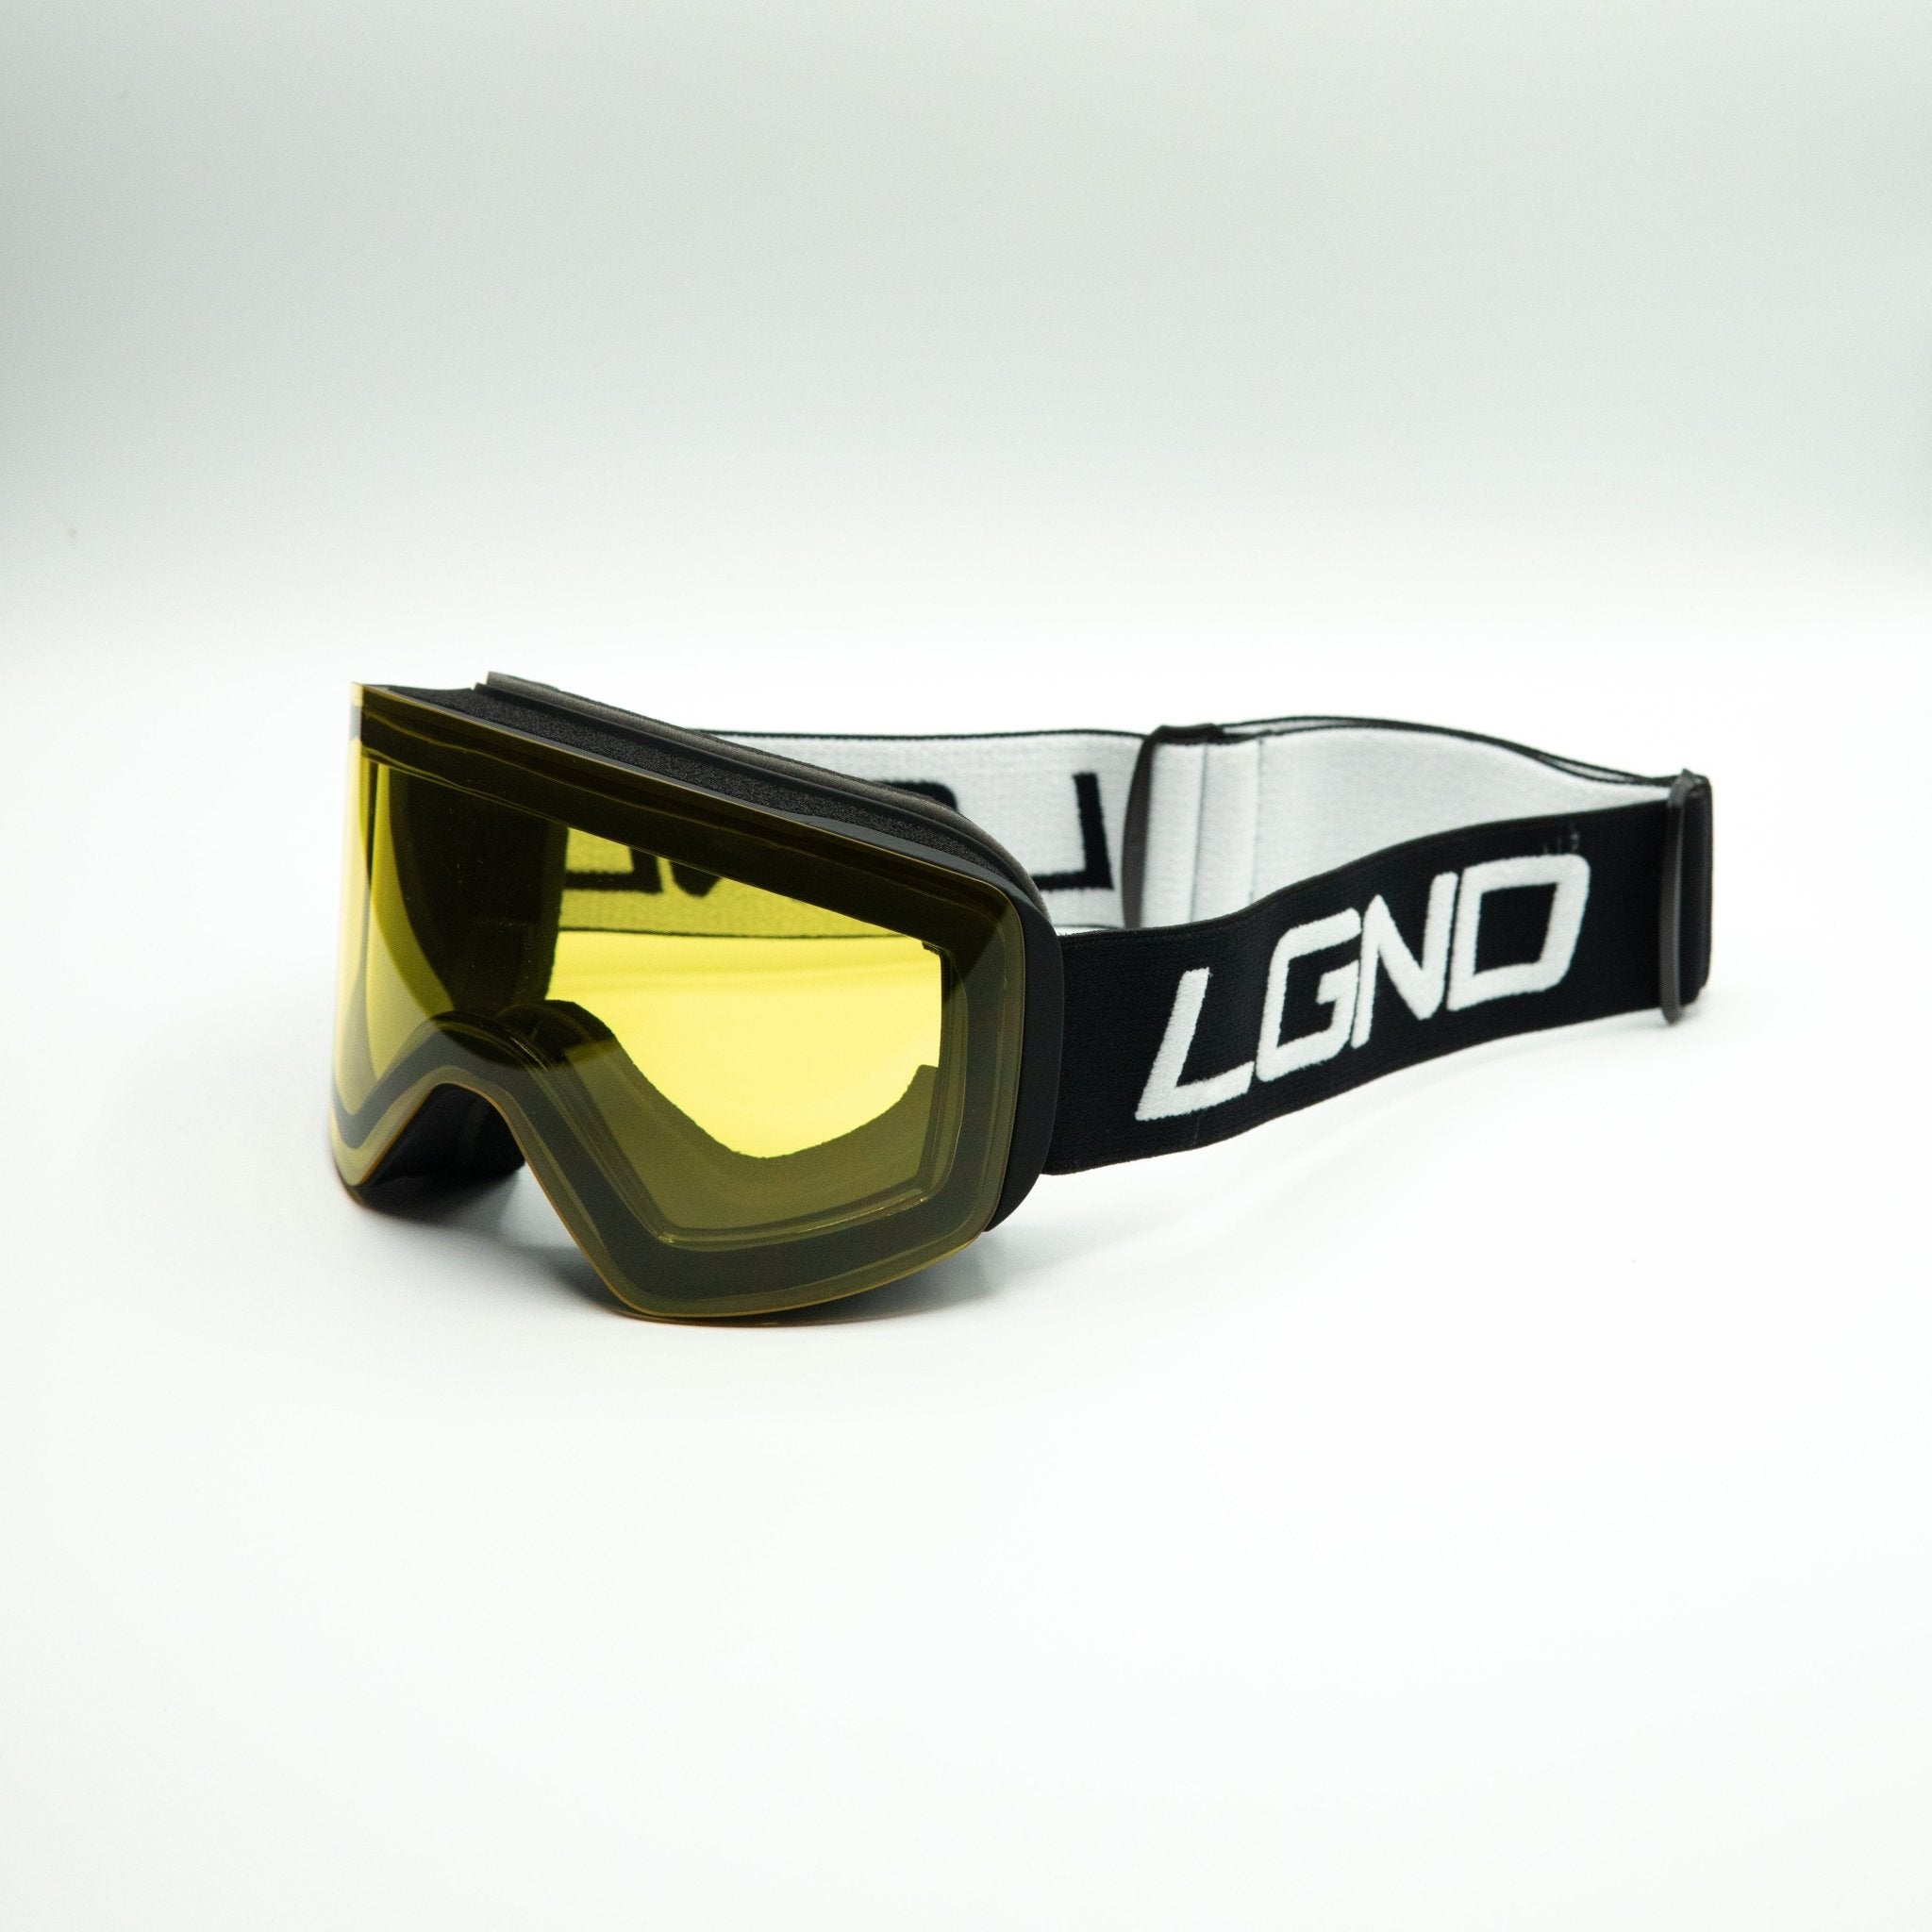 Blackout Snow Goggles - LGND SUPPLY CO.